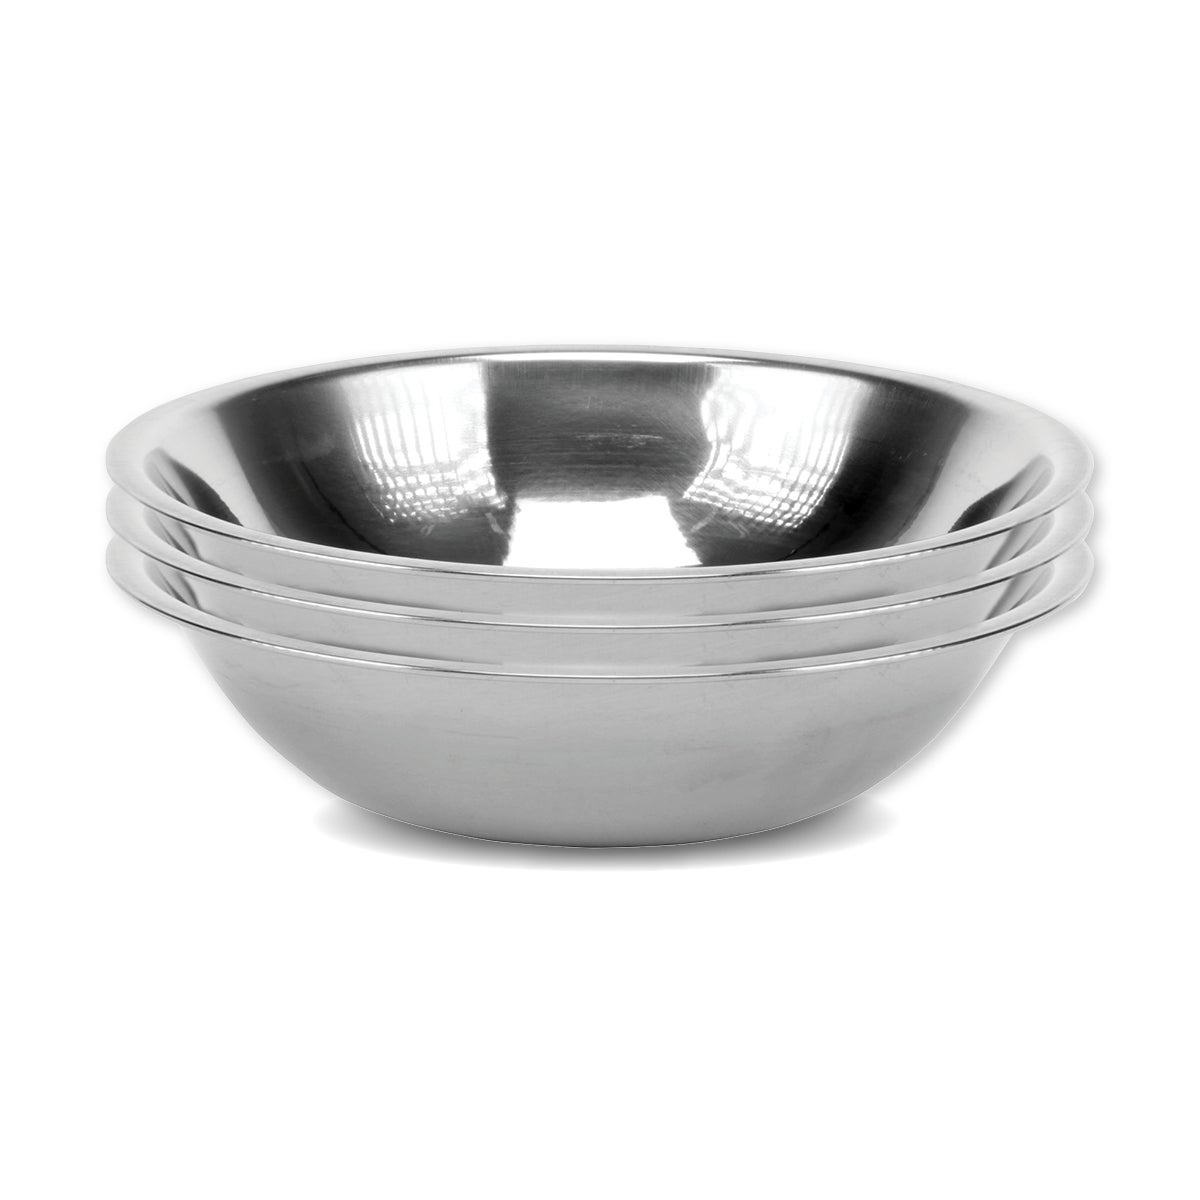 Home Master 3PCE Mixing Bowl Stainless Steel Dishwasher Safe Lightweight 16cm